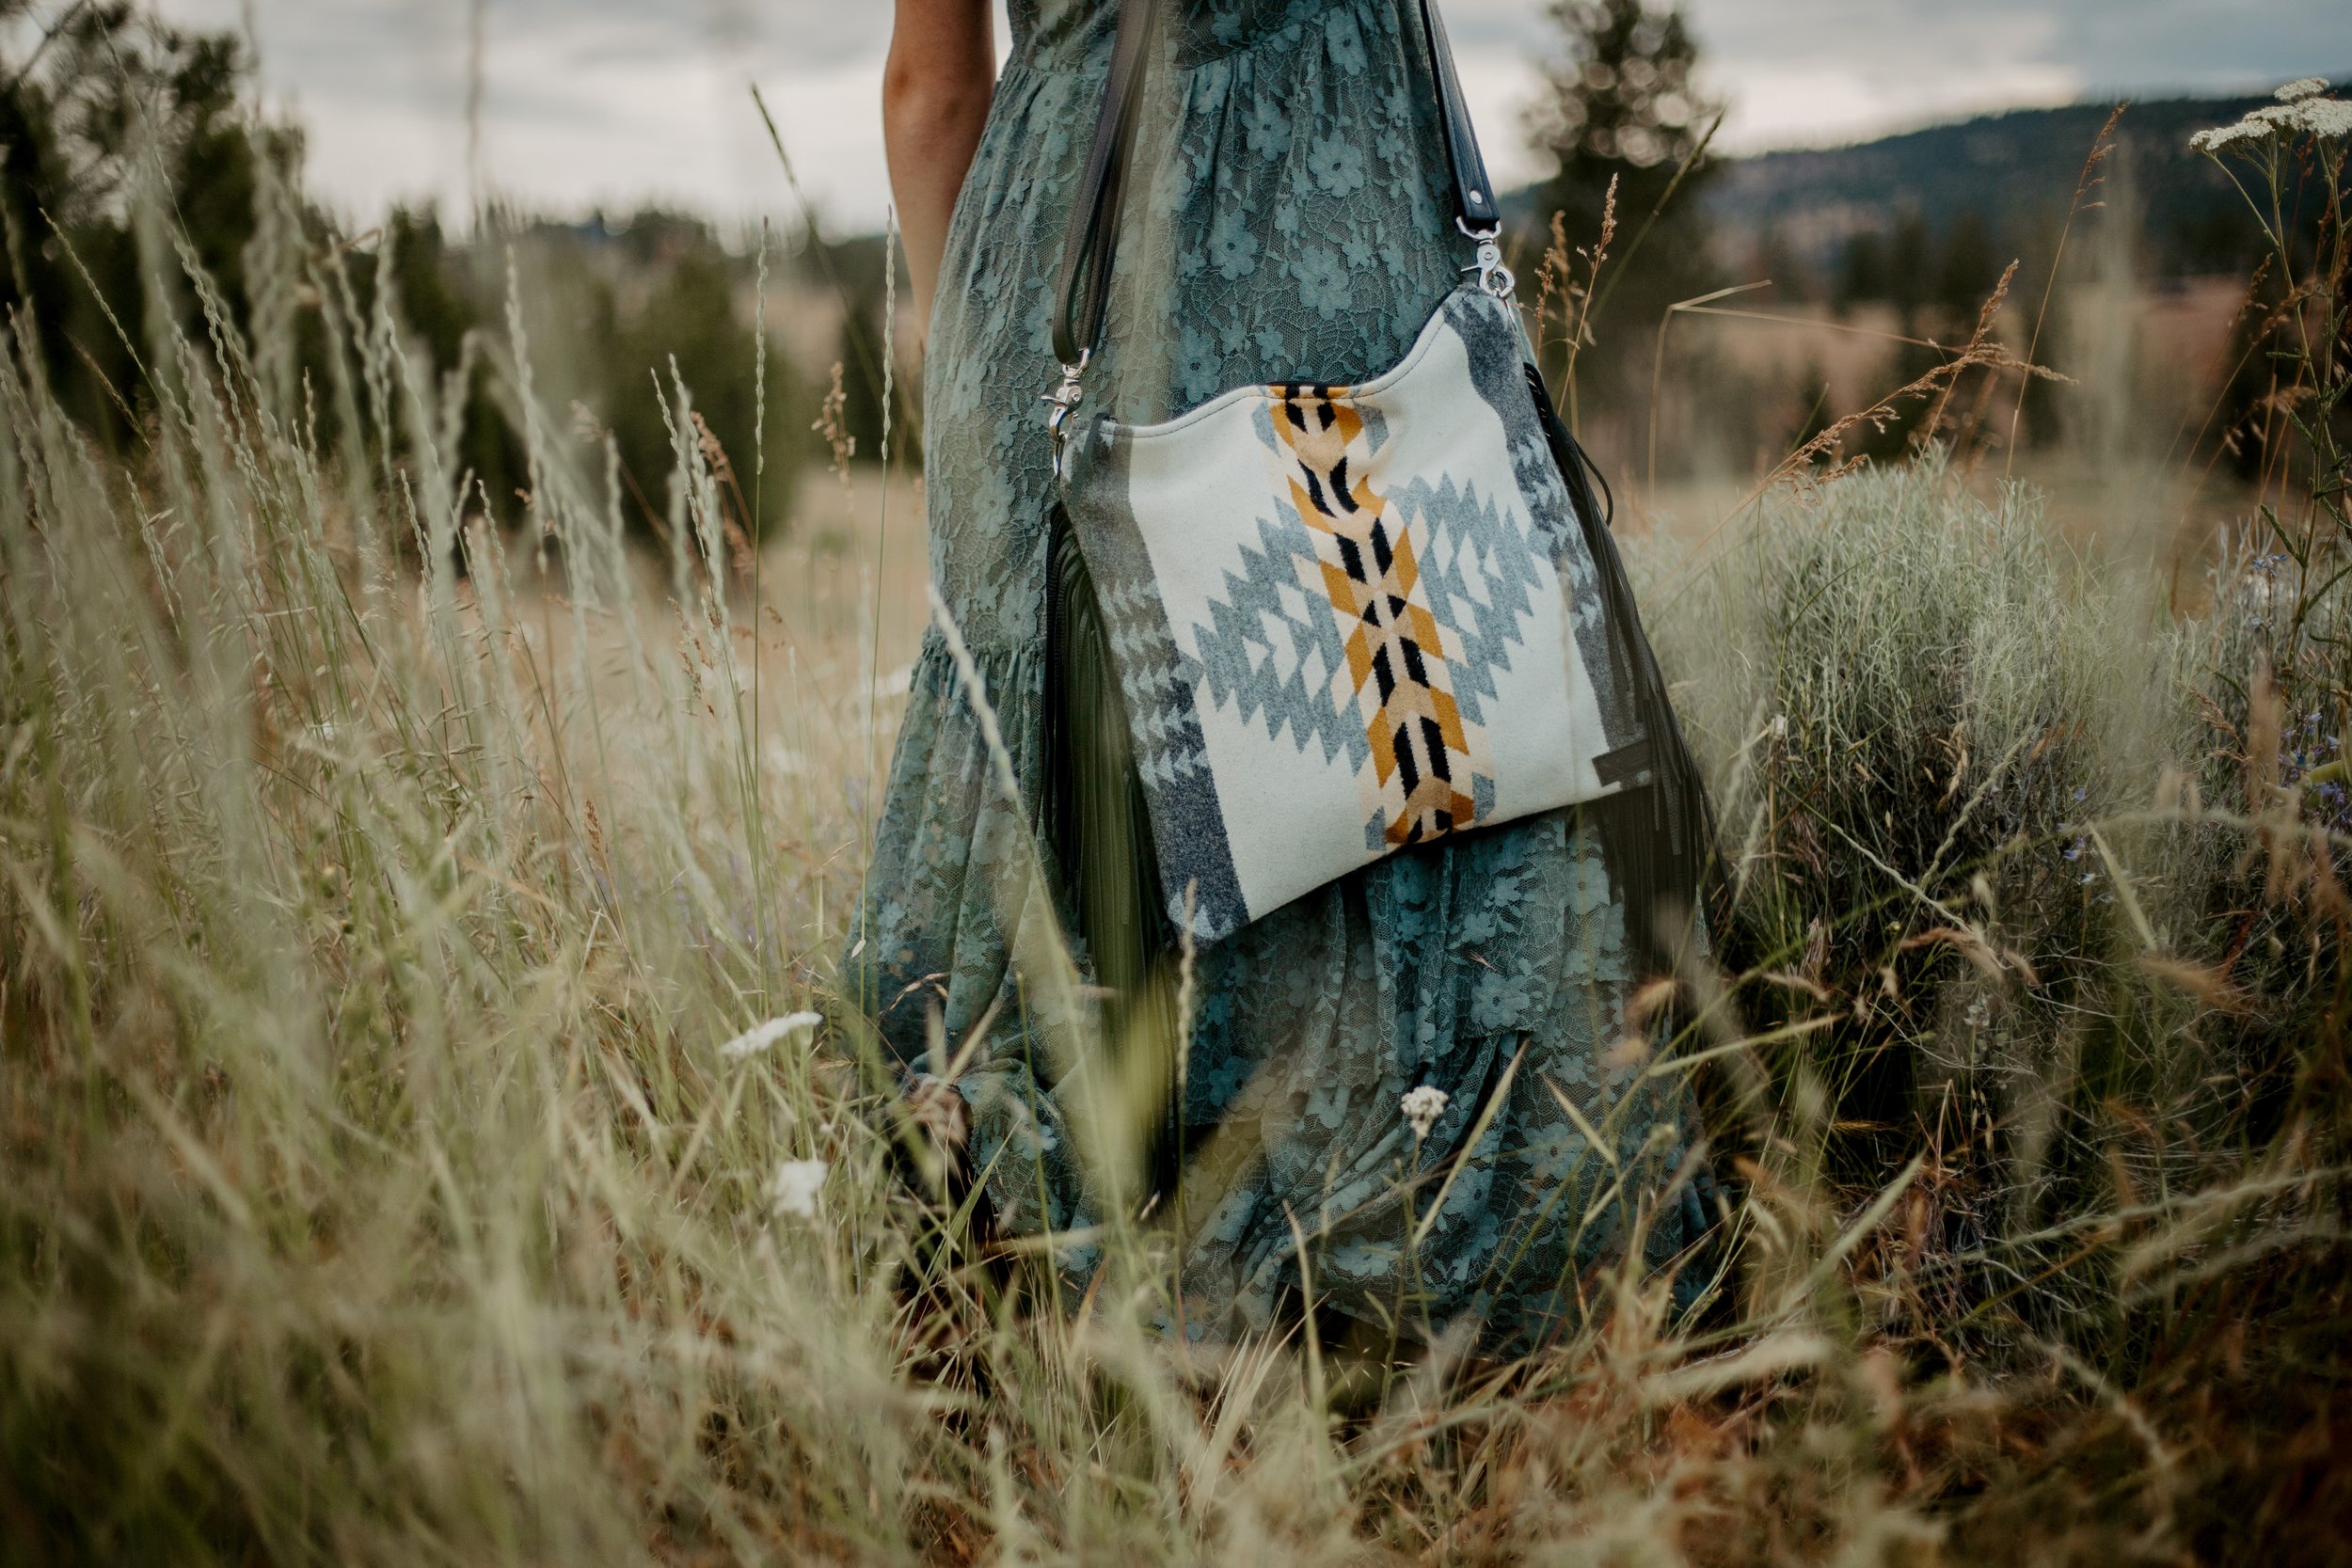 Beaded Leather Fringed Handcrafted Western Bag